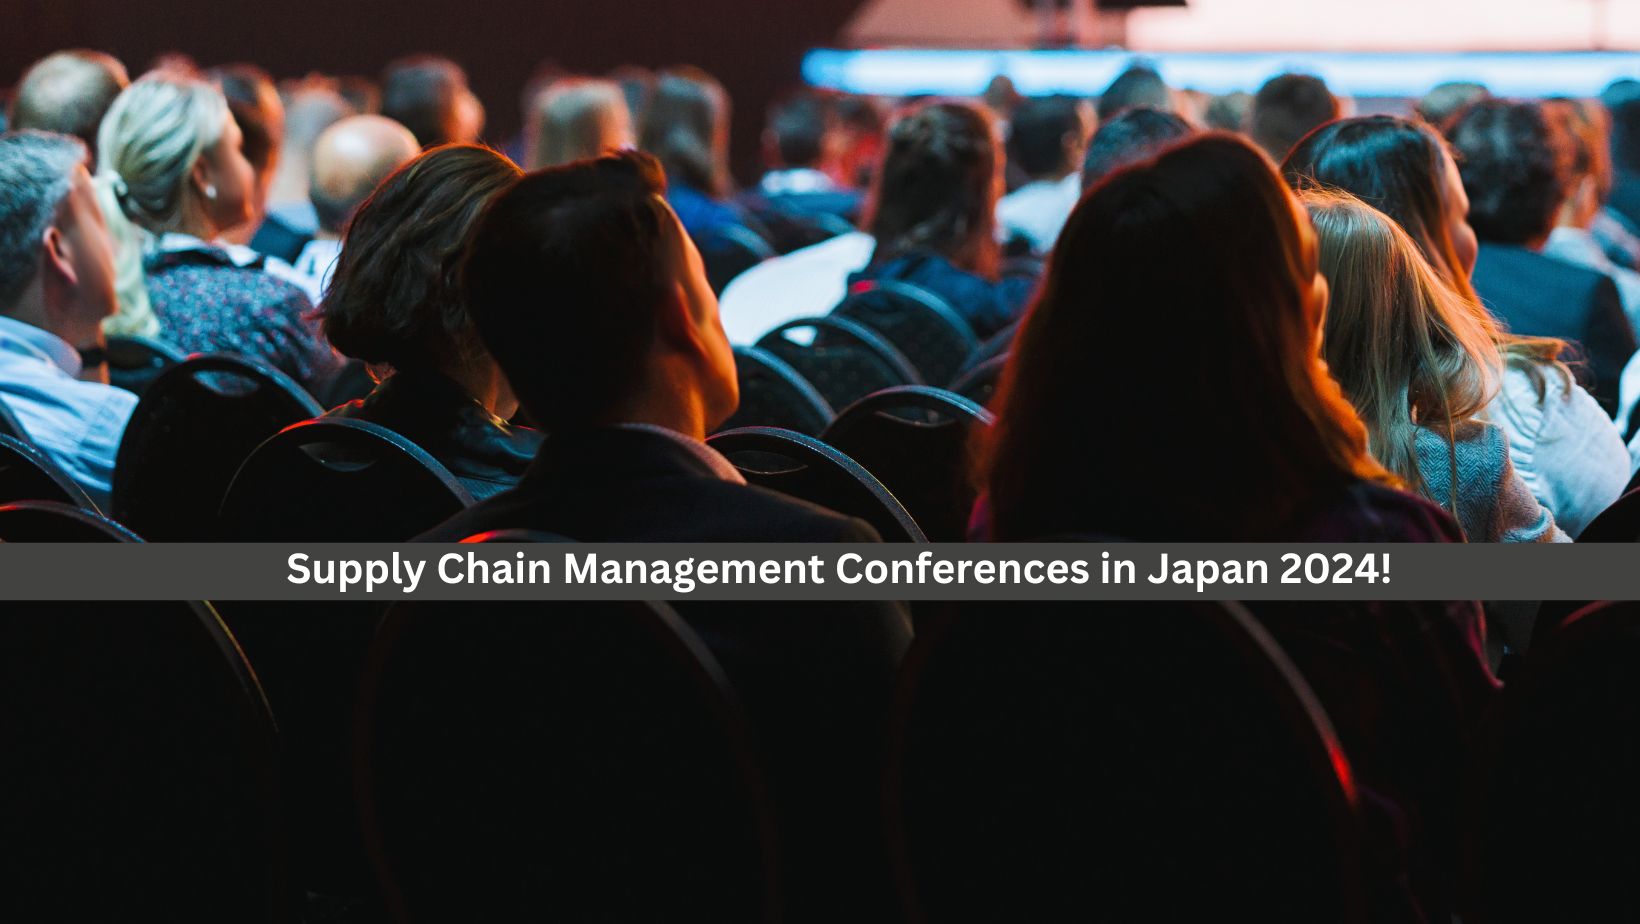 Supply Chain Management Conferences